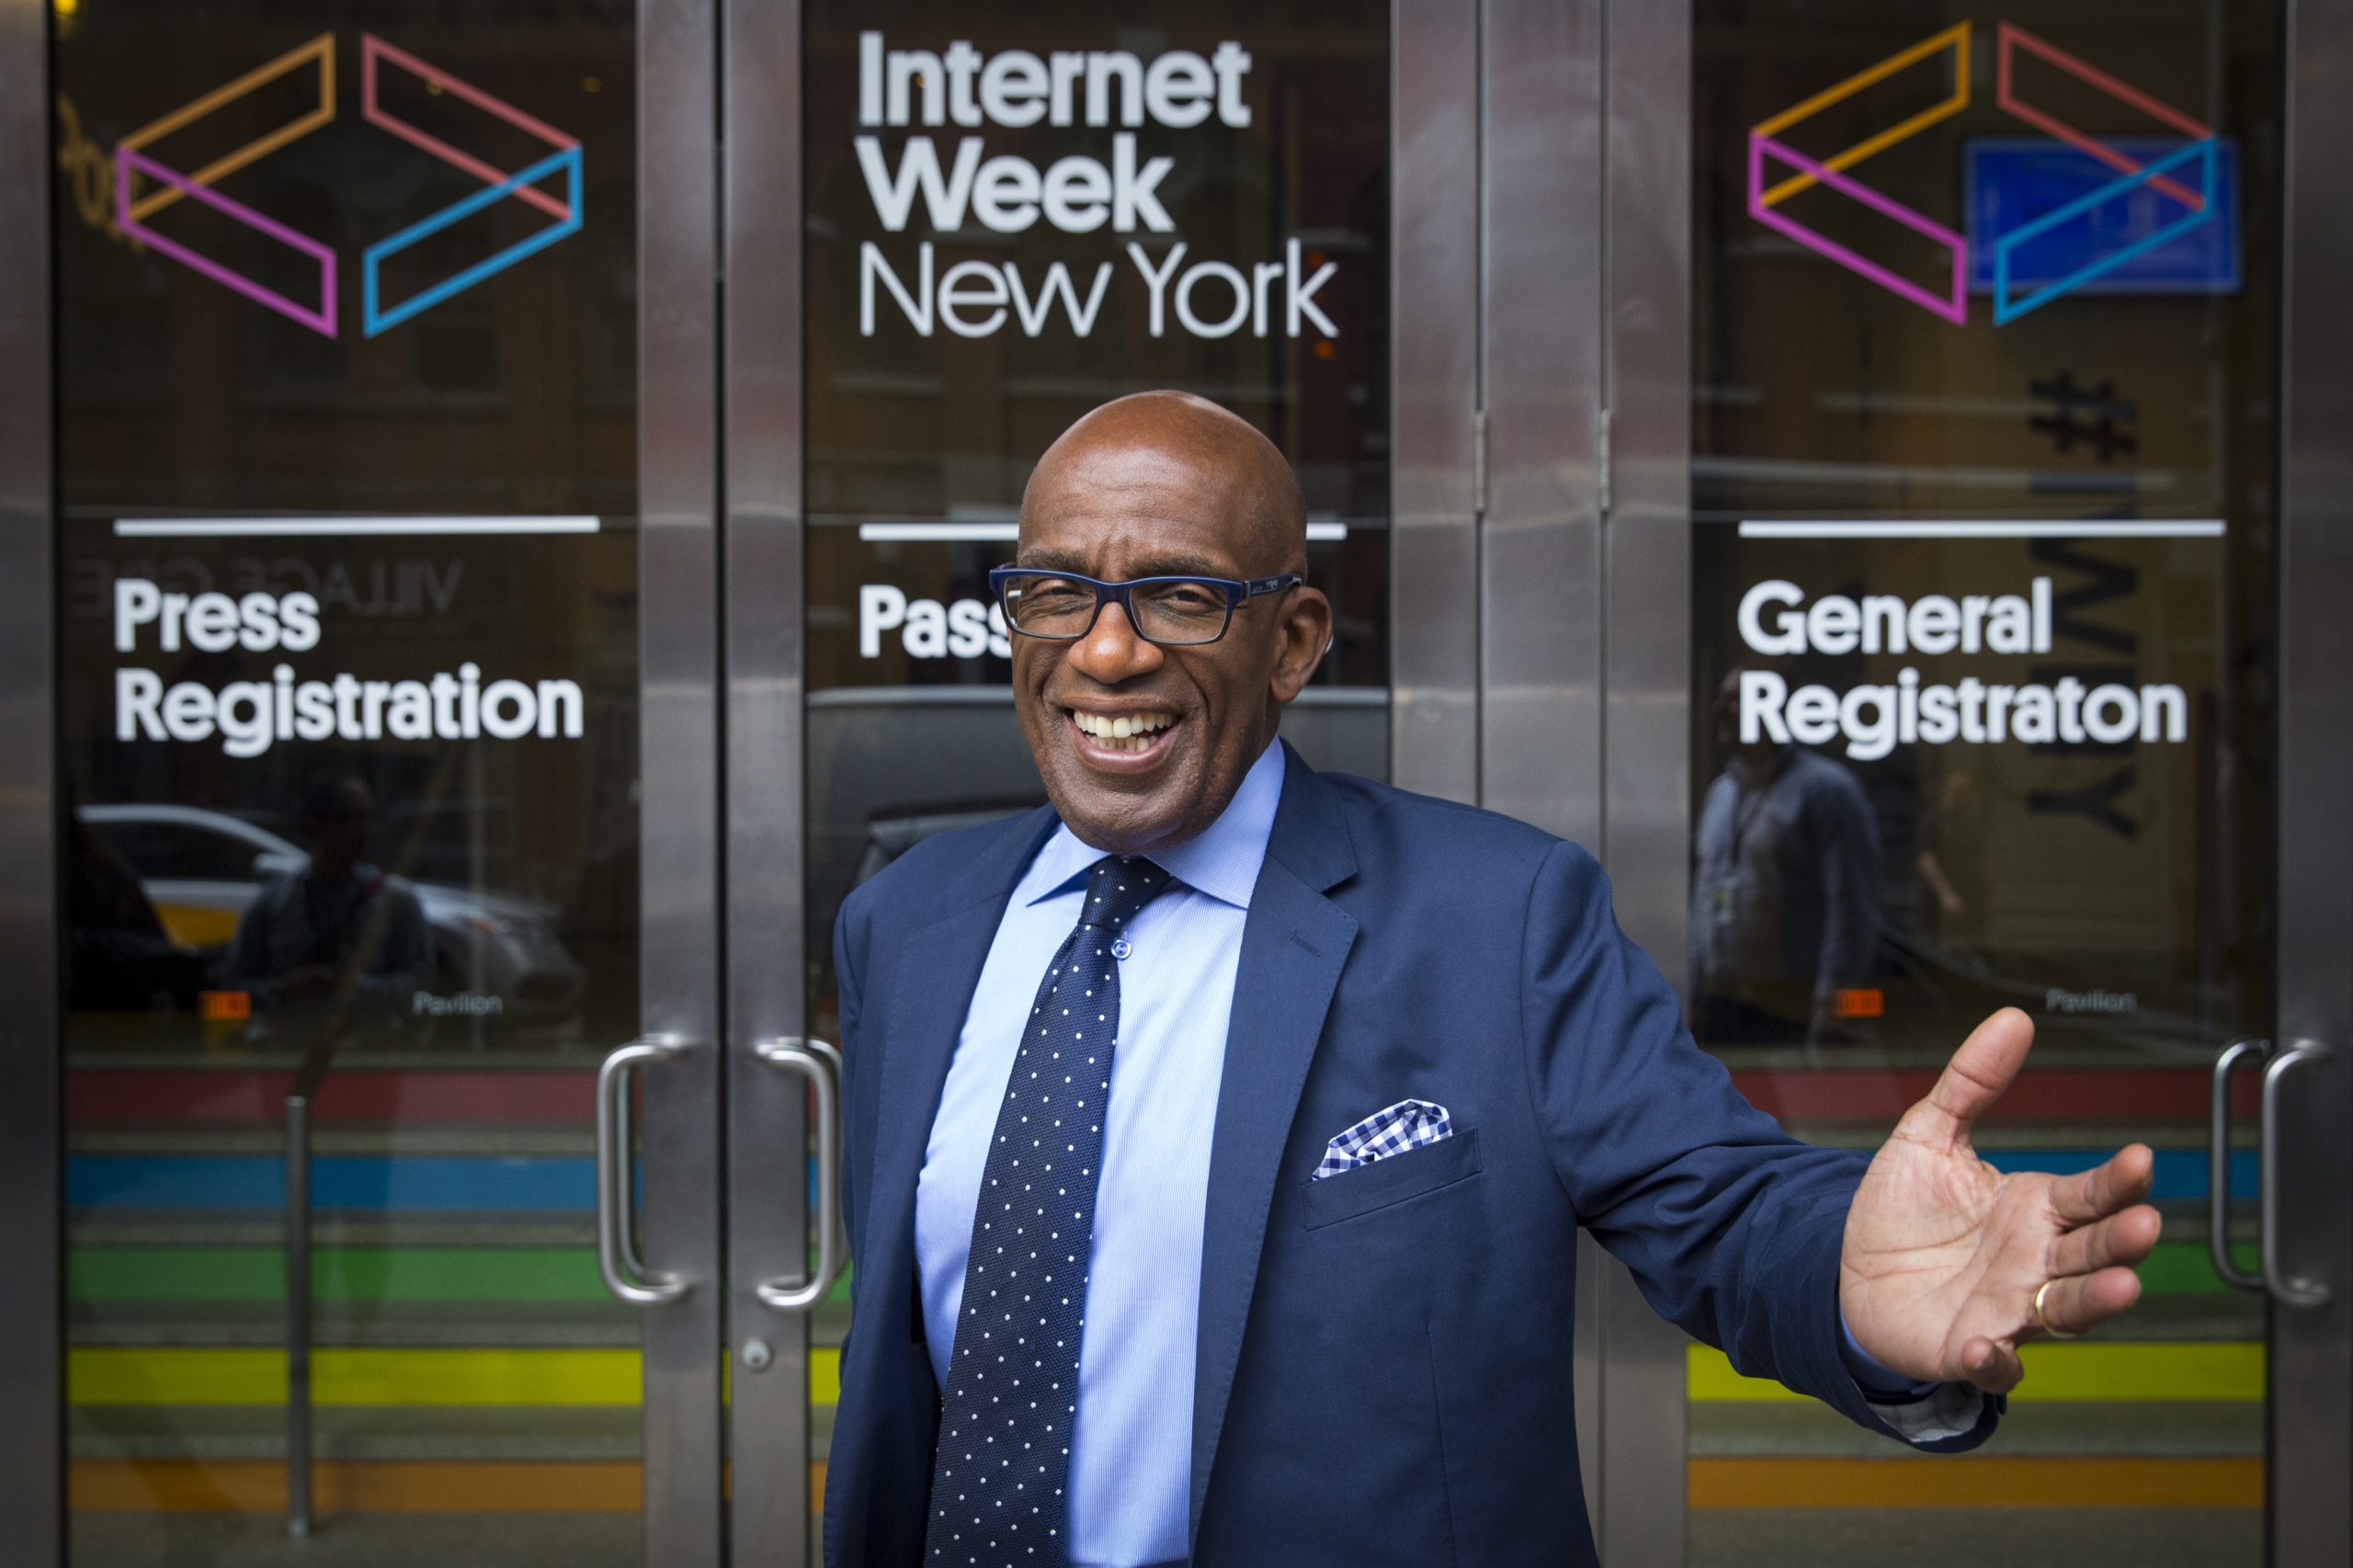 Al Roker says the Thanksgiving Day Parade will look different but he plans on still hosting it